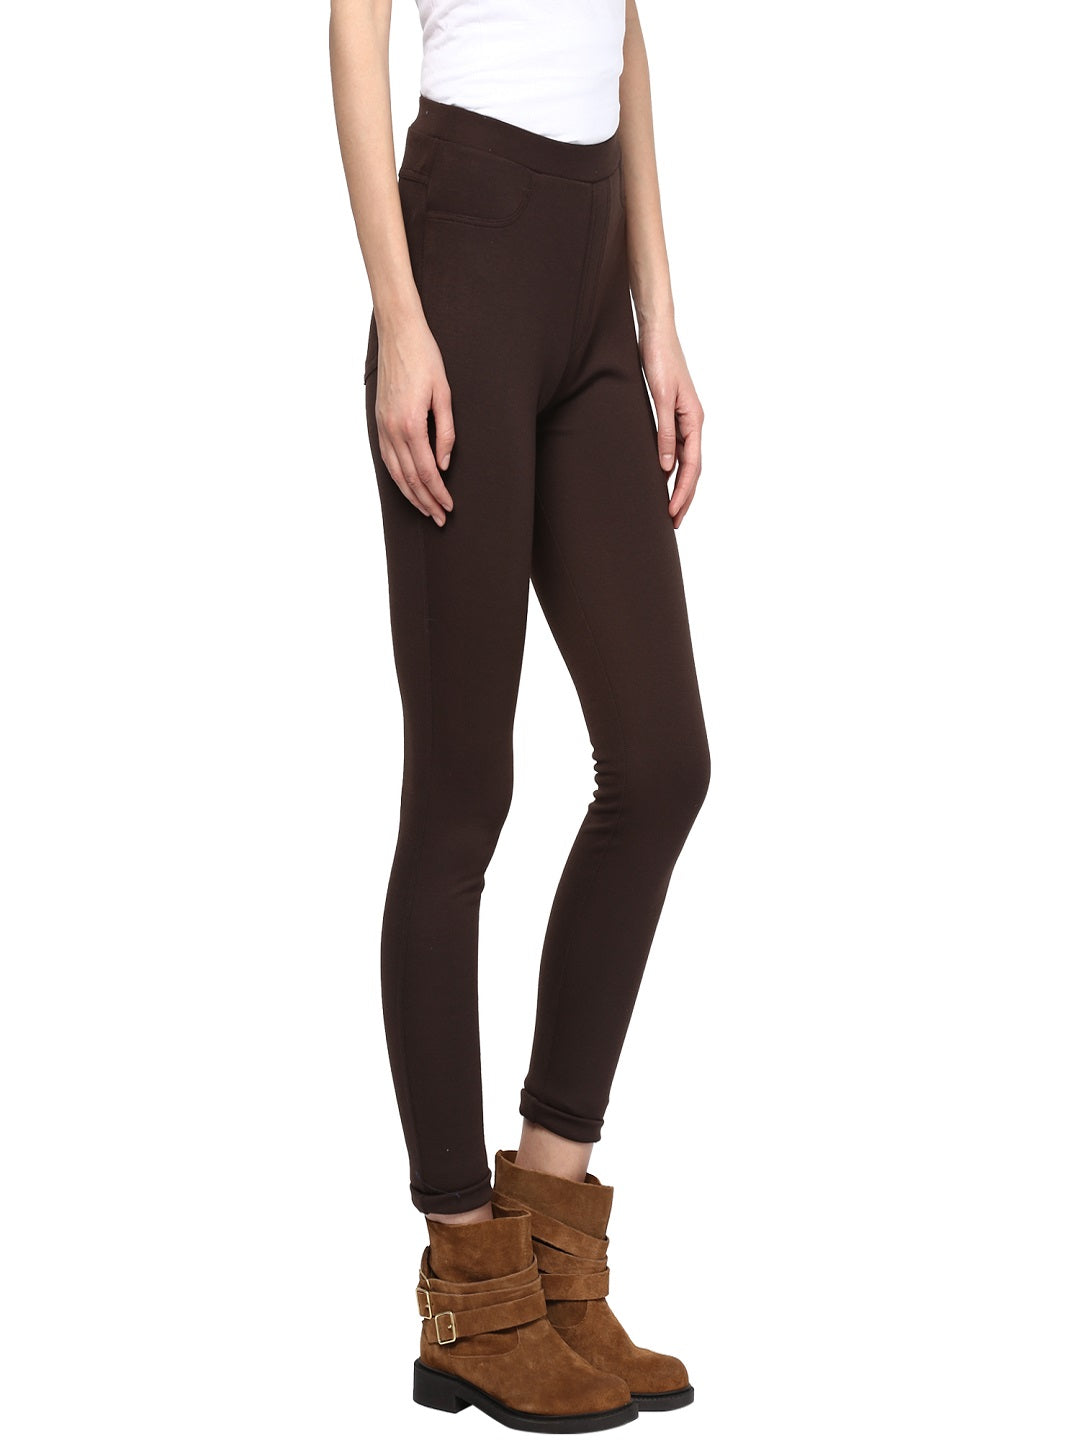 Gipsy Coffee Casual Rayon Jegging